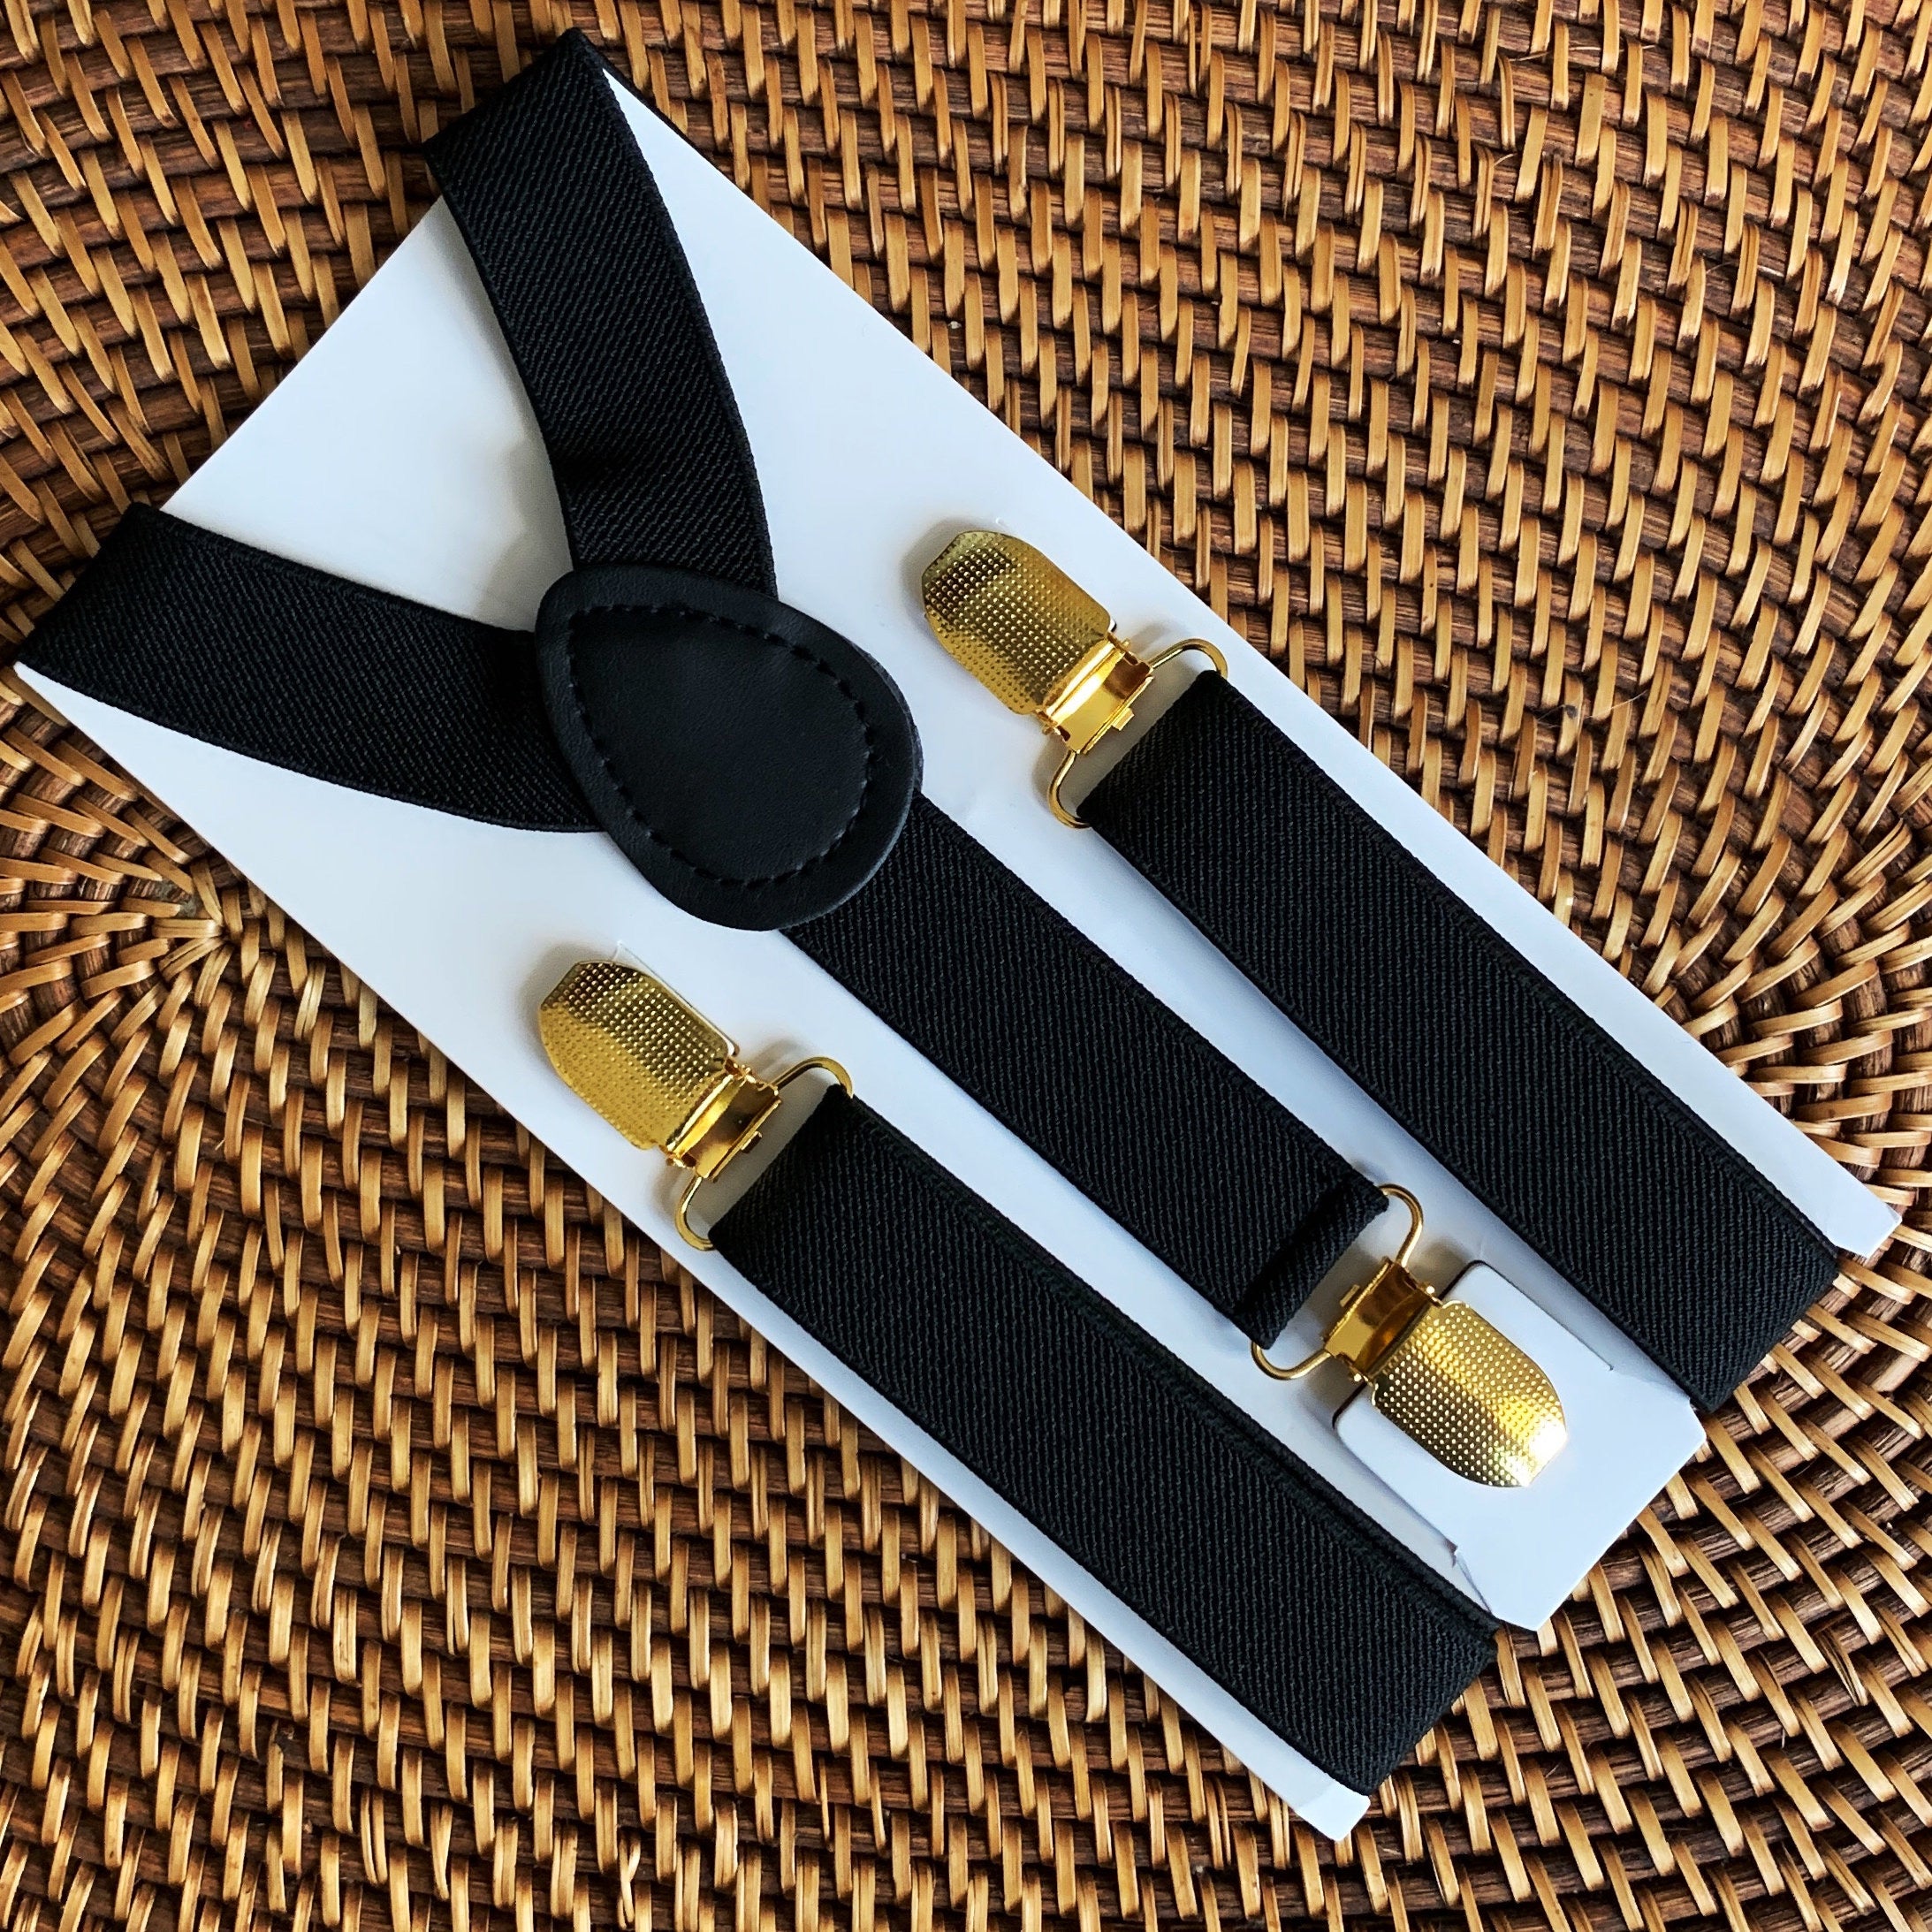 Black and Gold Bow Tie Belt